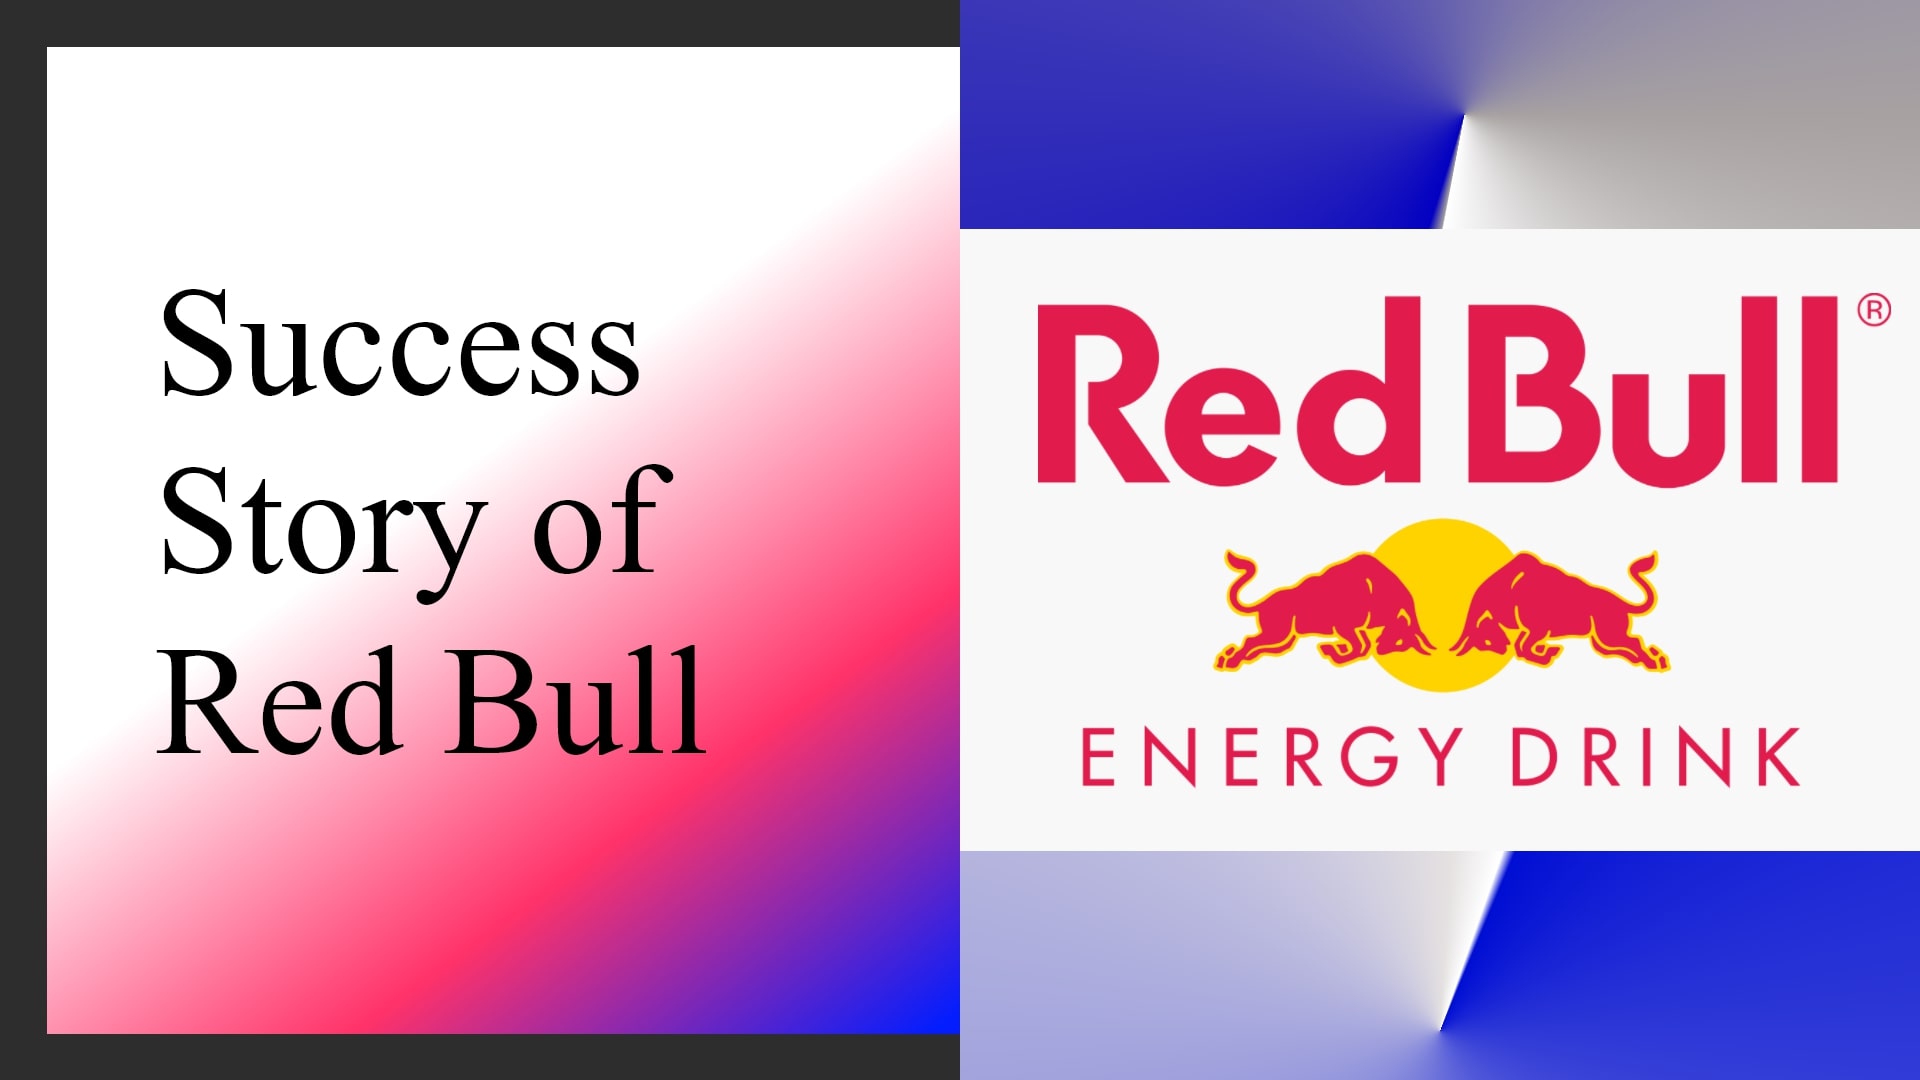 Red Bull Success Story